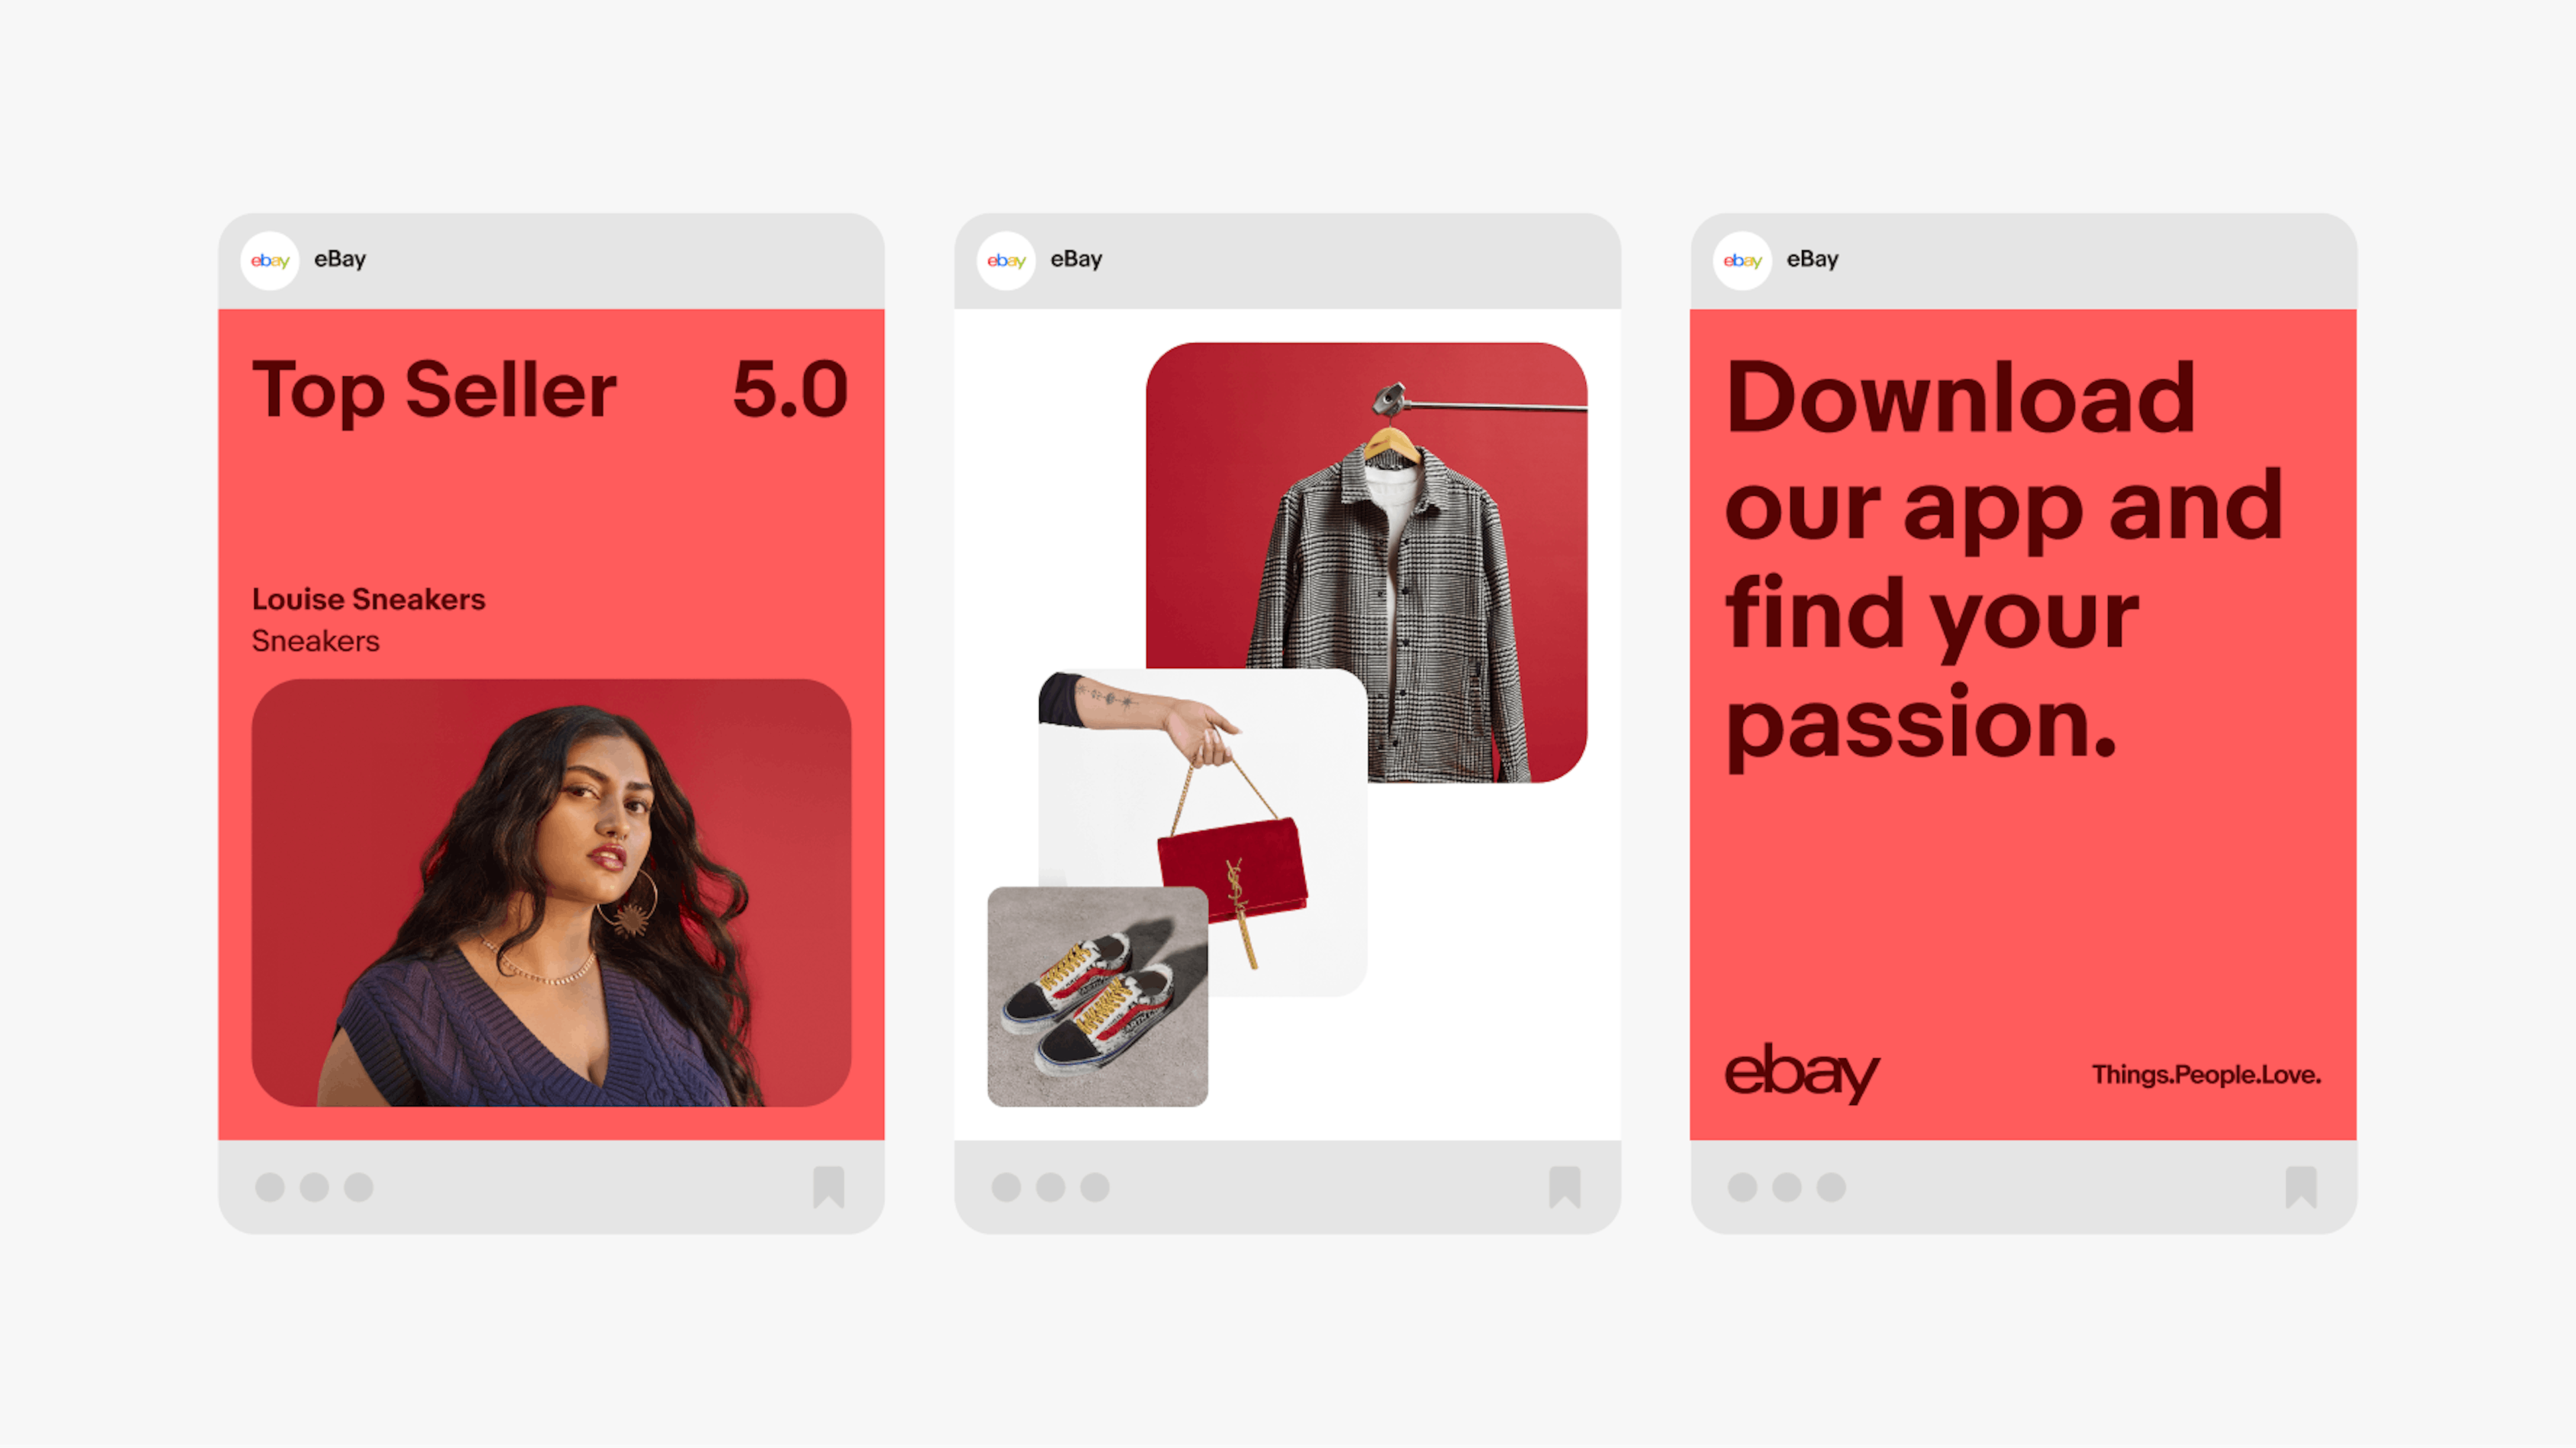 Three vibrant red social ads highlighting a top seller in fashion. The ads contain photography and tone-on-tone type and logo.